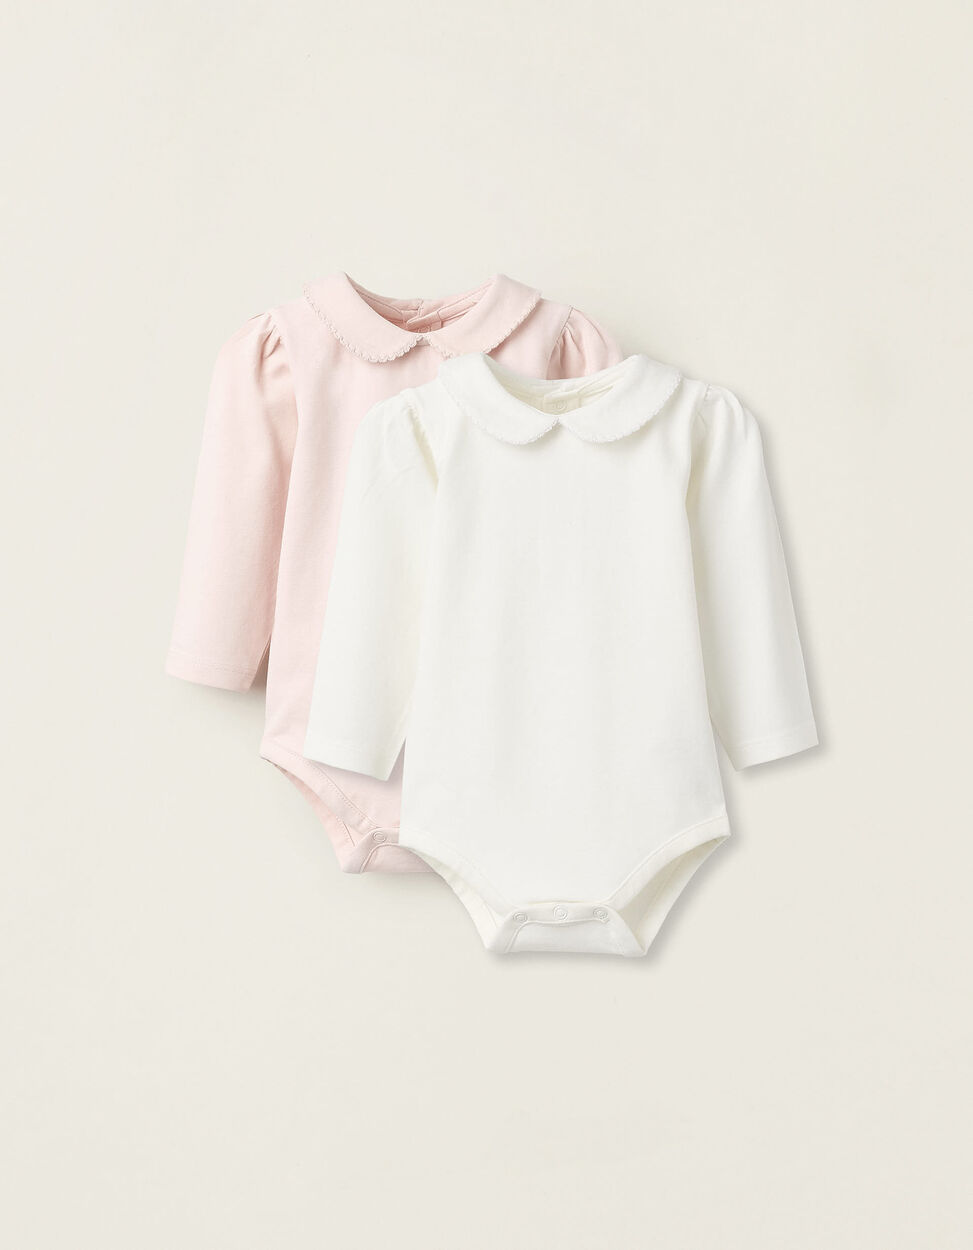 Buy Online Pack of 2 Bodysuits with Peter Pan Collar for Newborn Girls, White/Pink